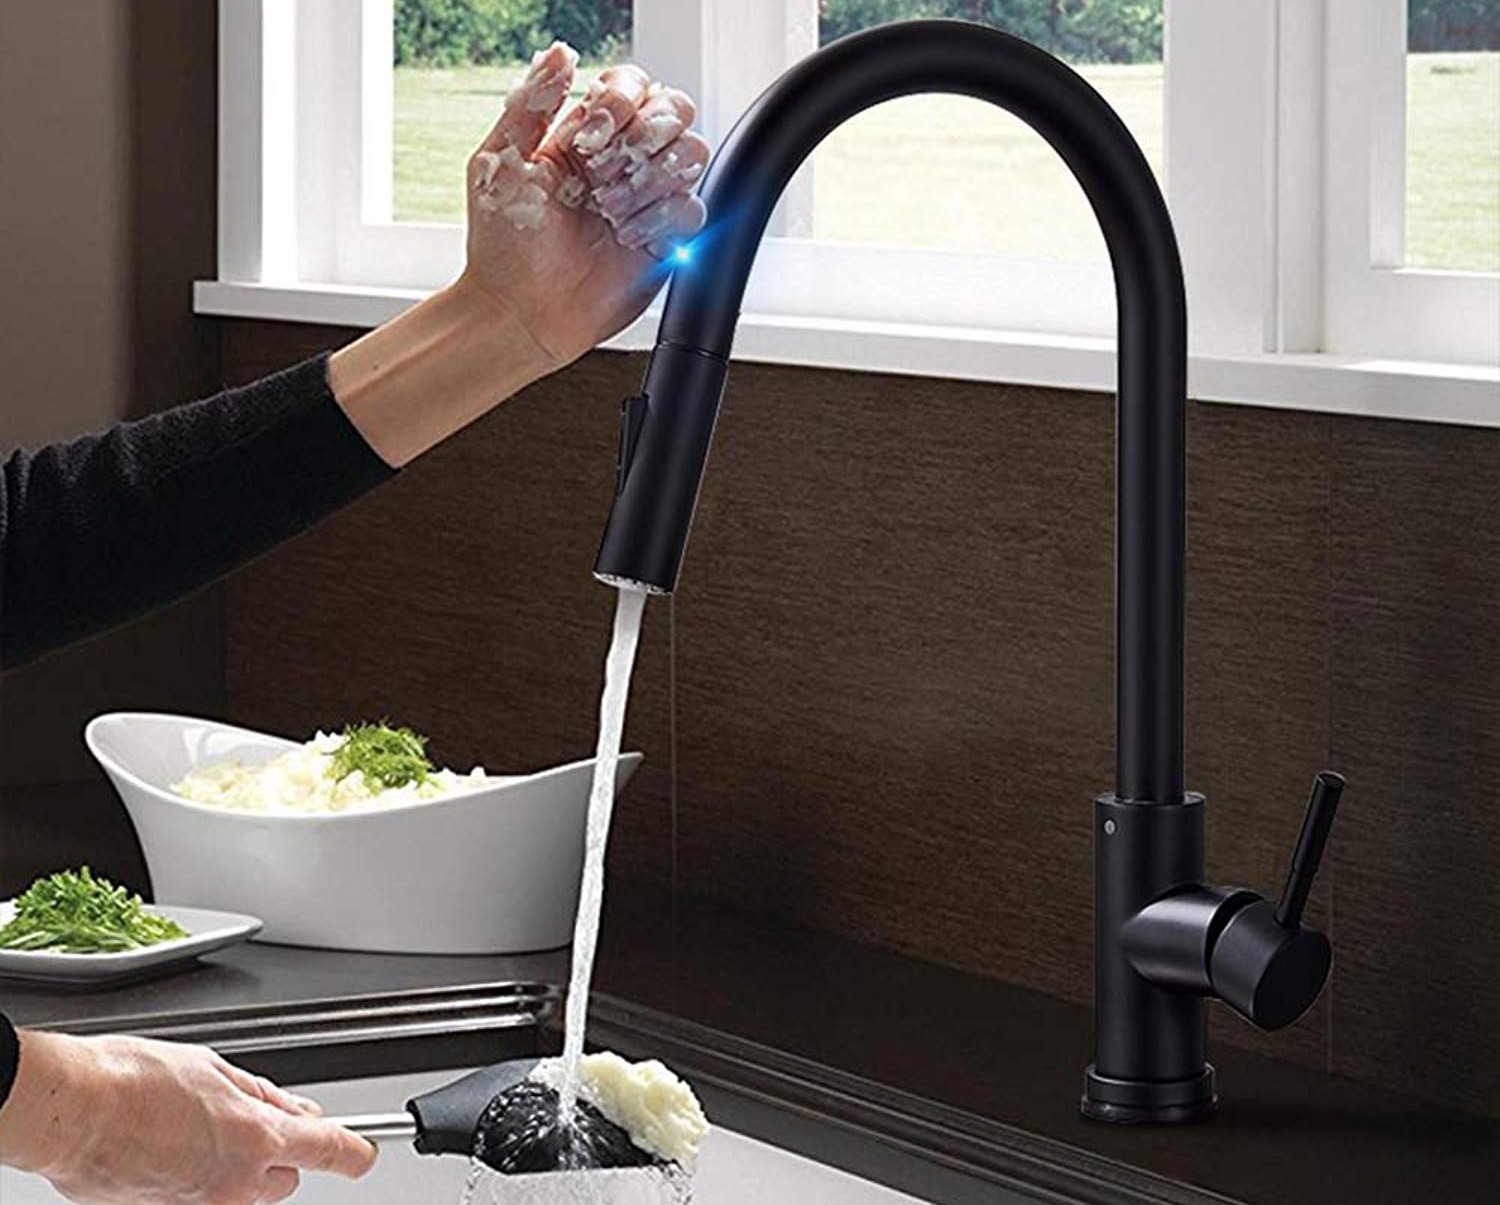 6 Best Kitchen Faucets Under 200 Dollars - Inexpensive and Well-Designed (Winter 2023)